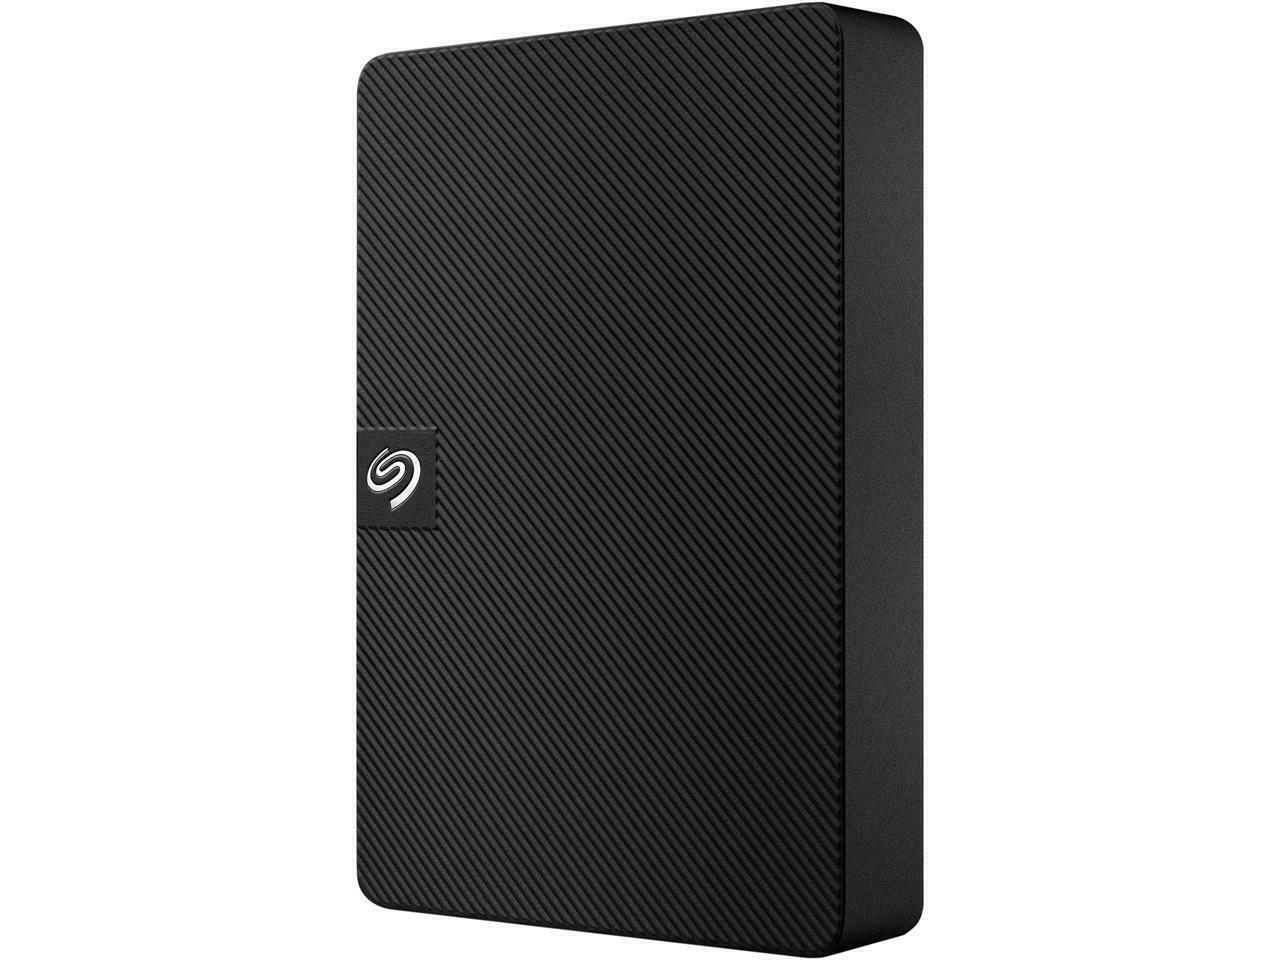 SEAGATE ONE 4TB TOUCH (SLIM & STYLISH,SOFTWARE FEATURES)( 3 YEARS WARRANTY )